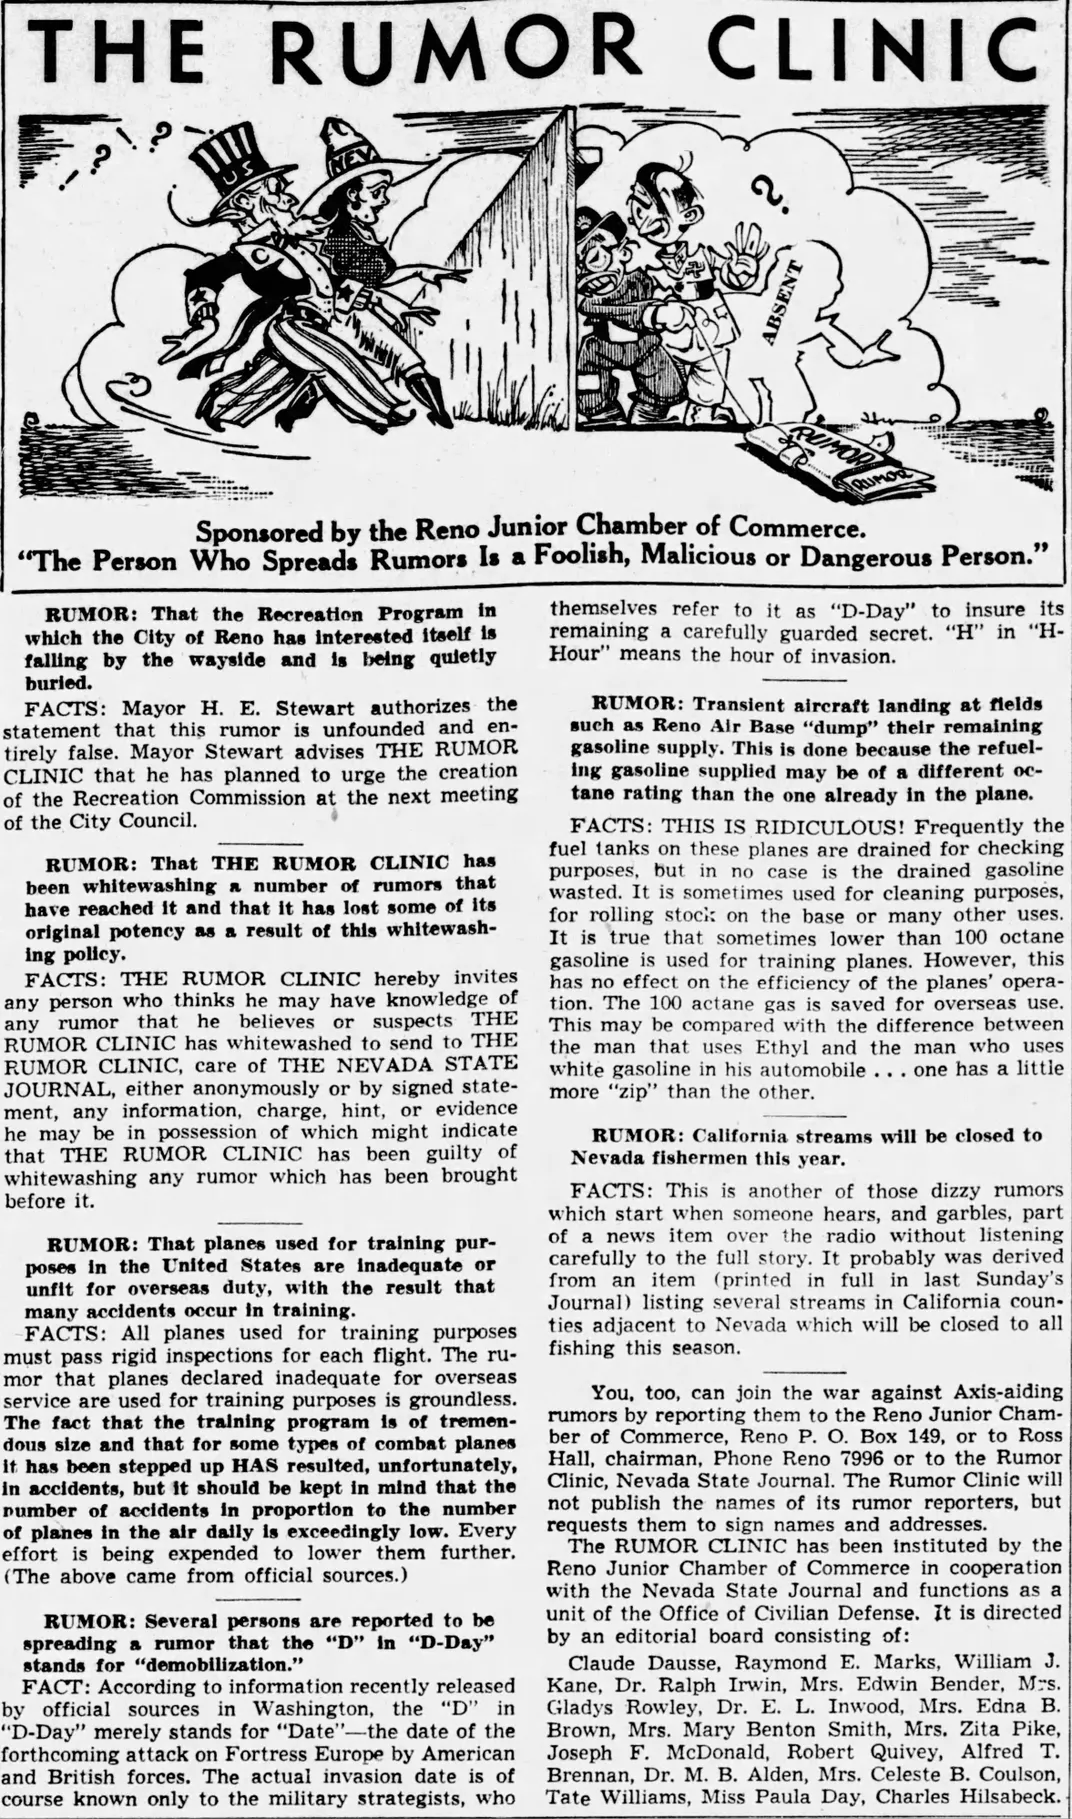 An August 1944 rumor clinic column published in Reno, Nevada